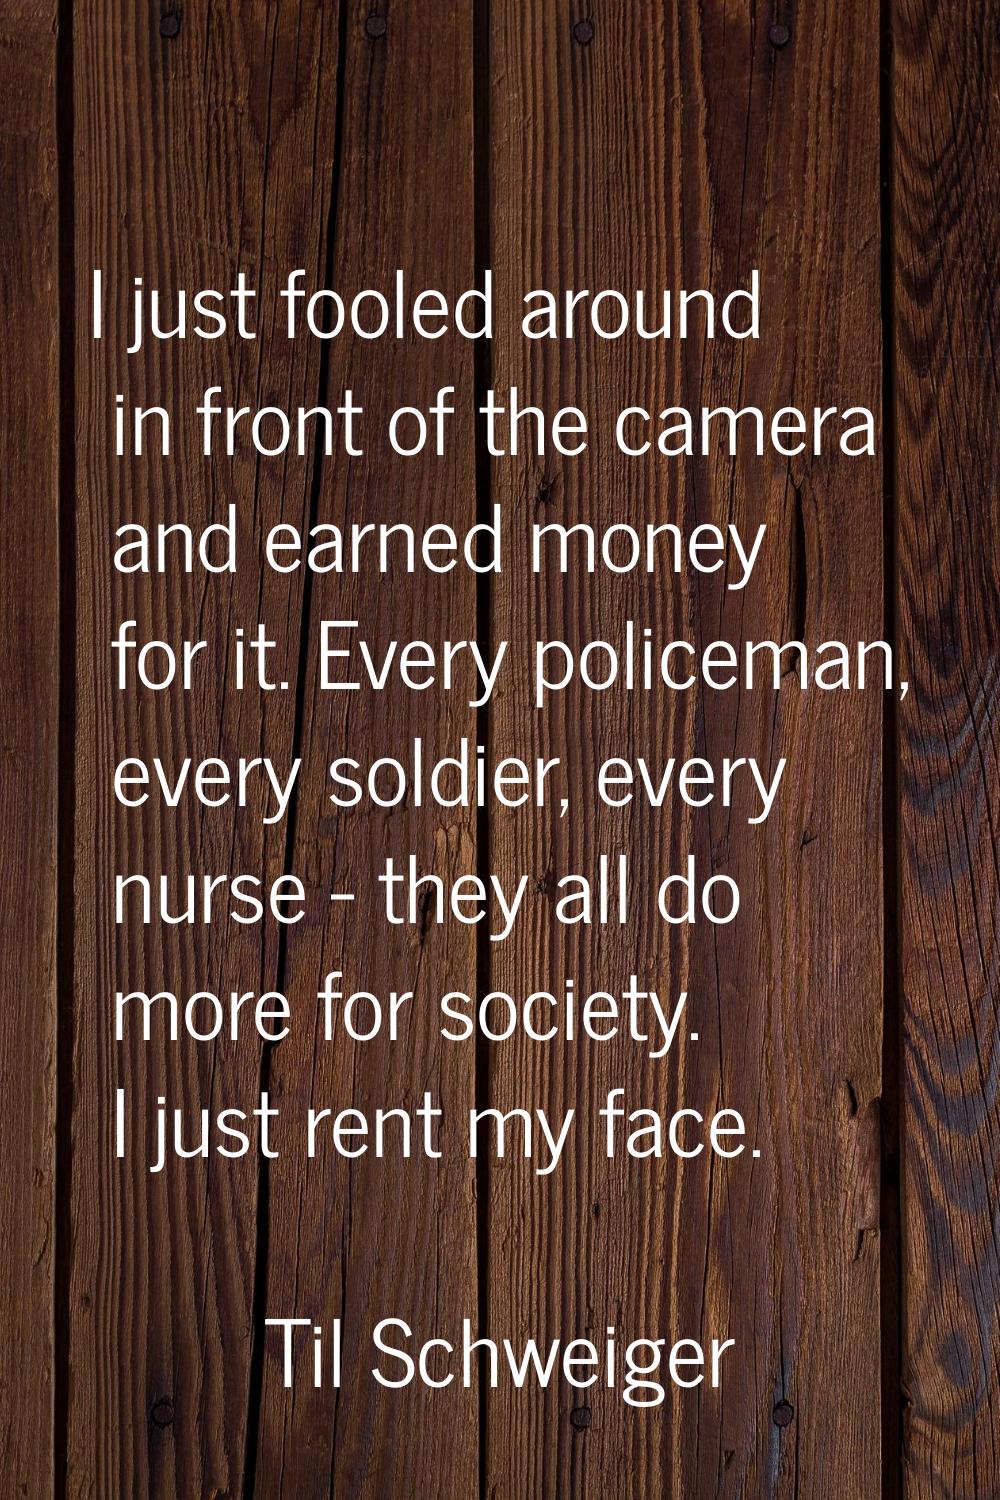 I just fooled around in front of the camera and earned money for it. Every policeman, every soldier